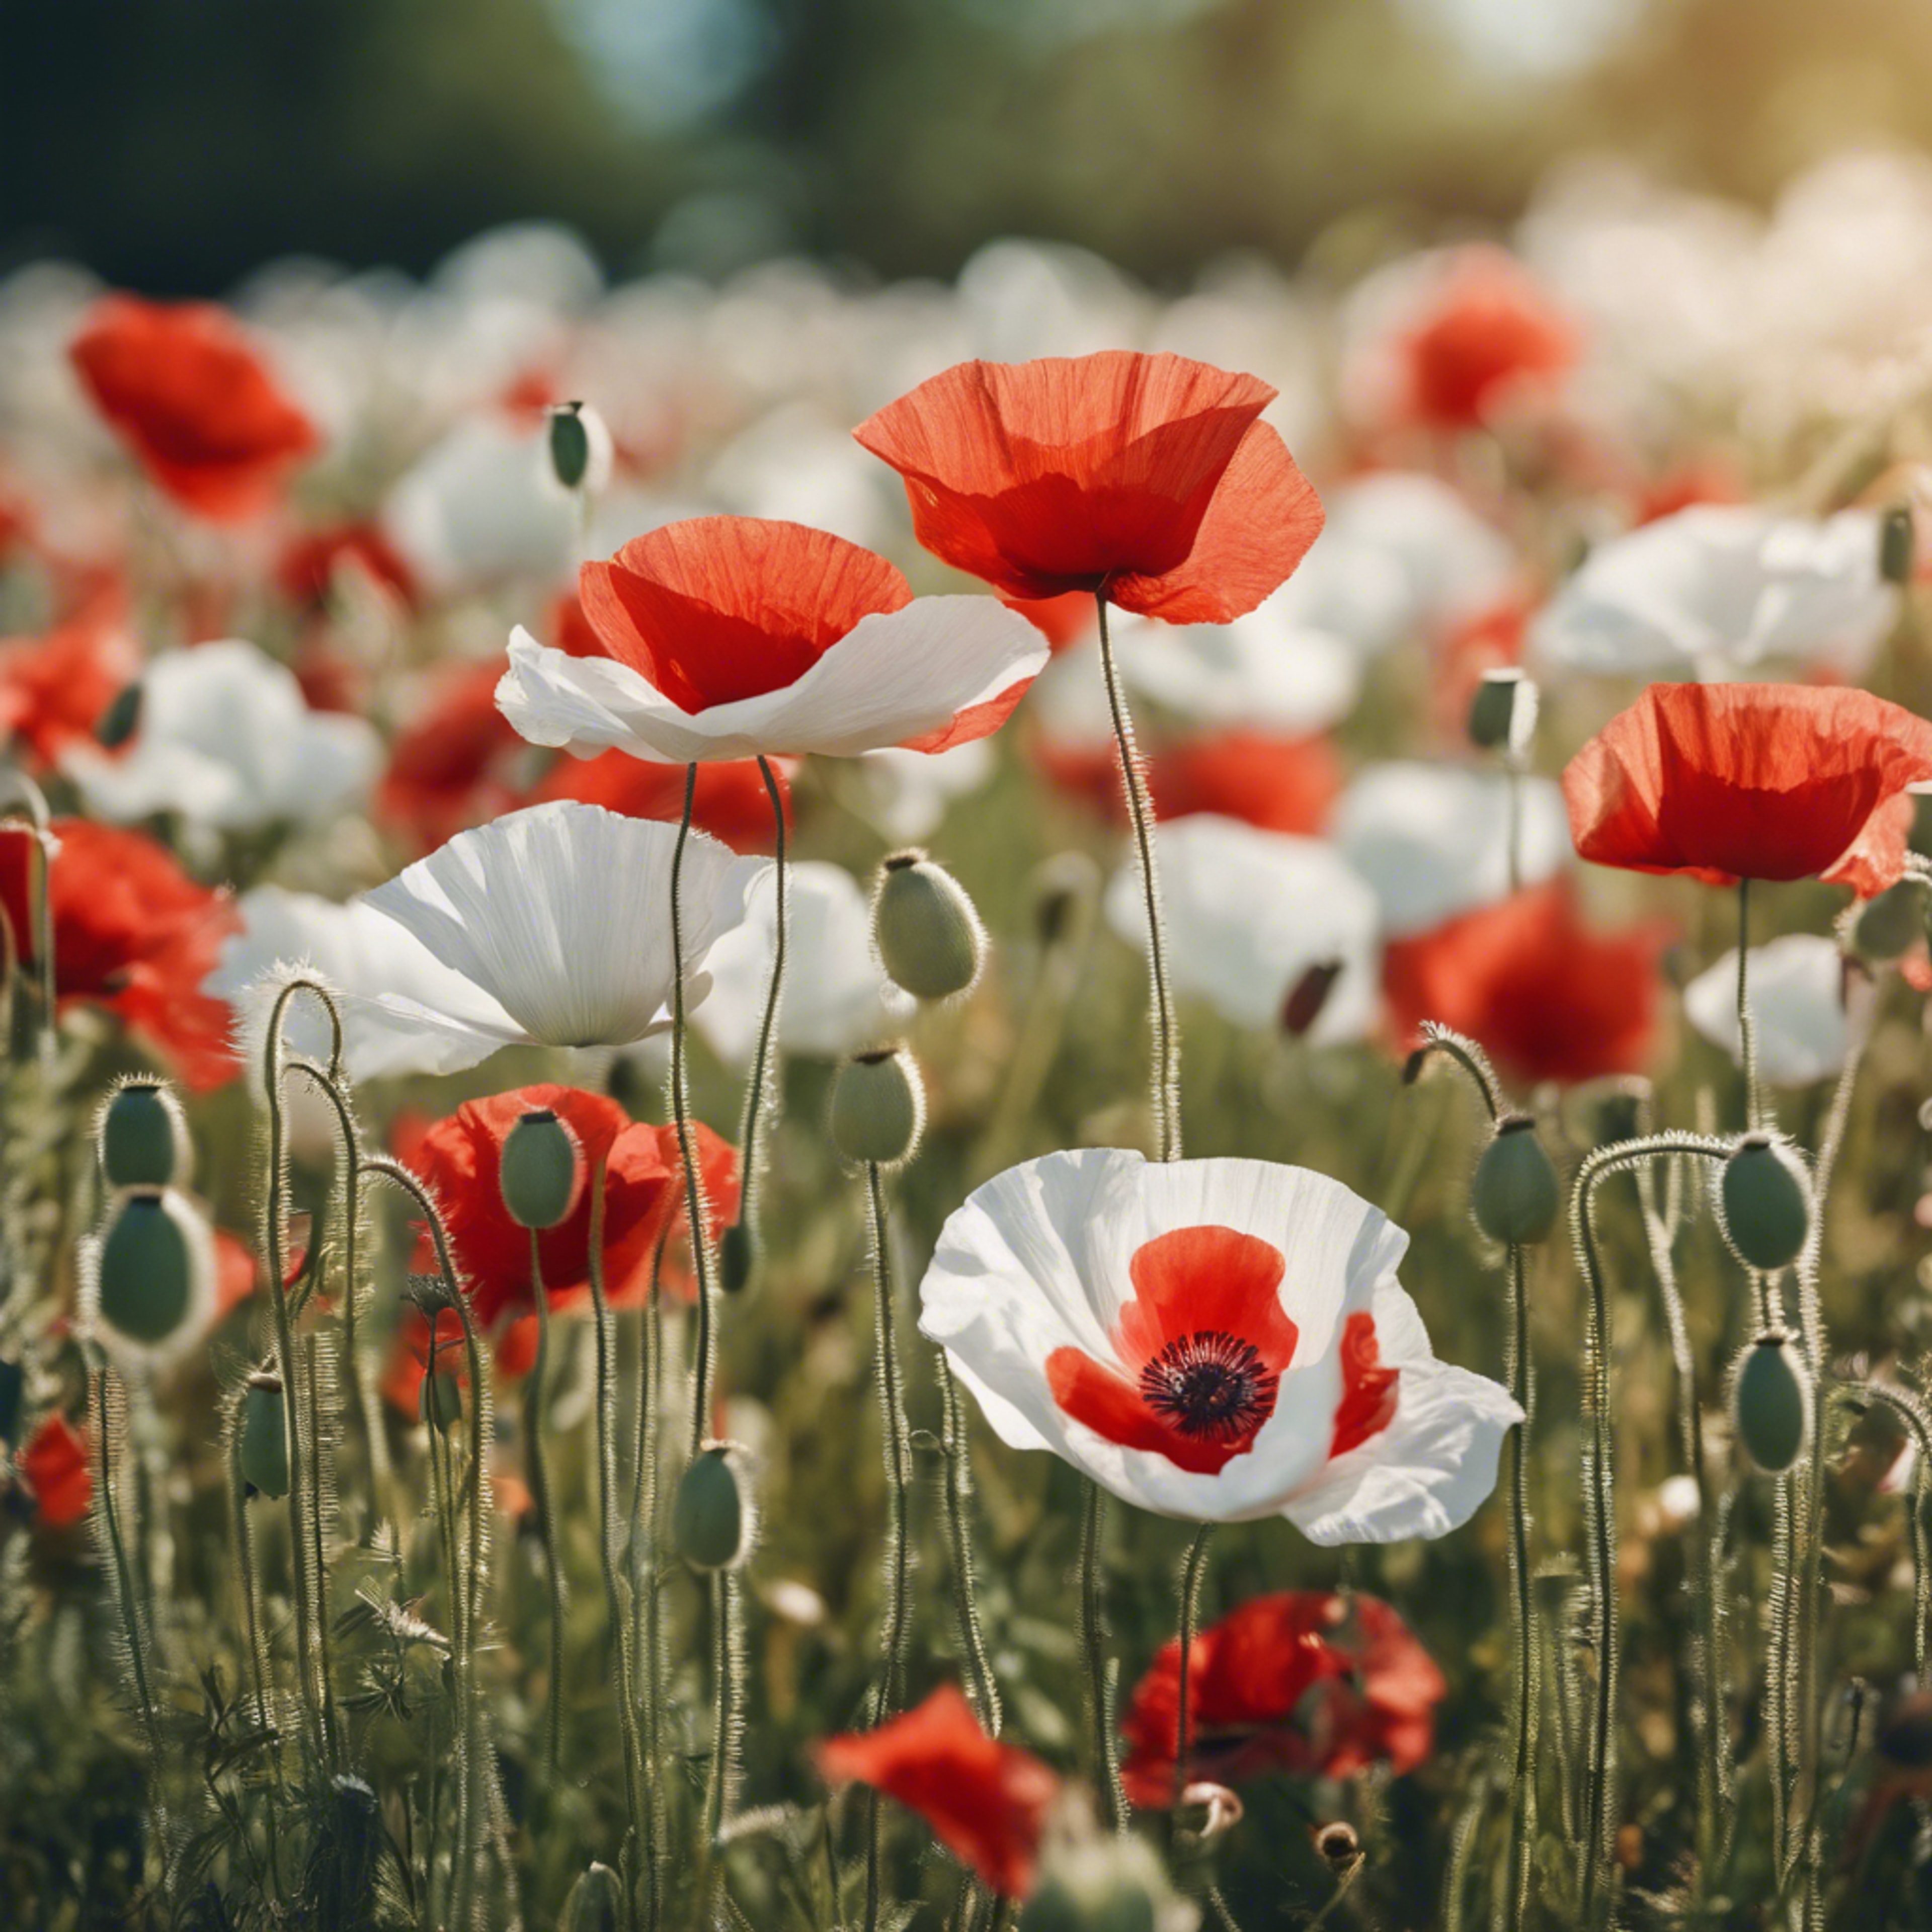 A patch of vibrant red and white poppy flowers in a summer meadow. วอลล์เปเปอร์[6e8905720b3f496680eb]